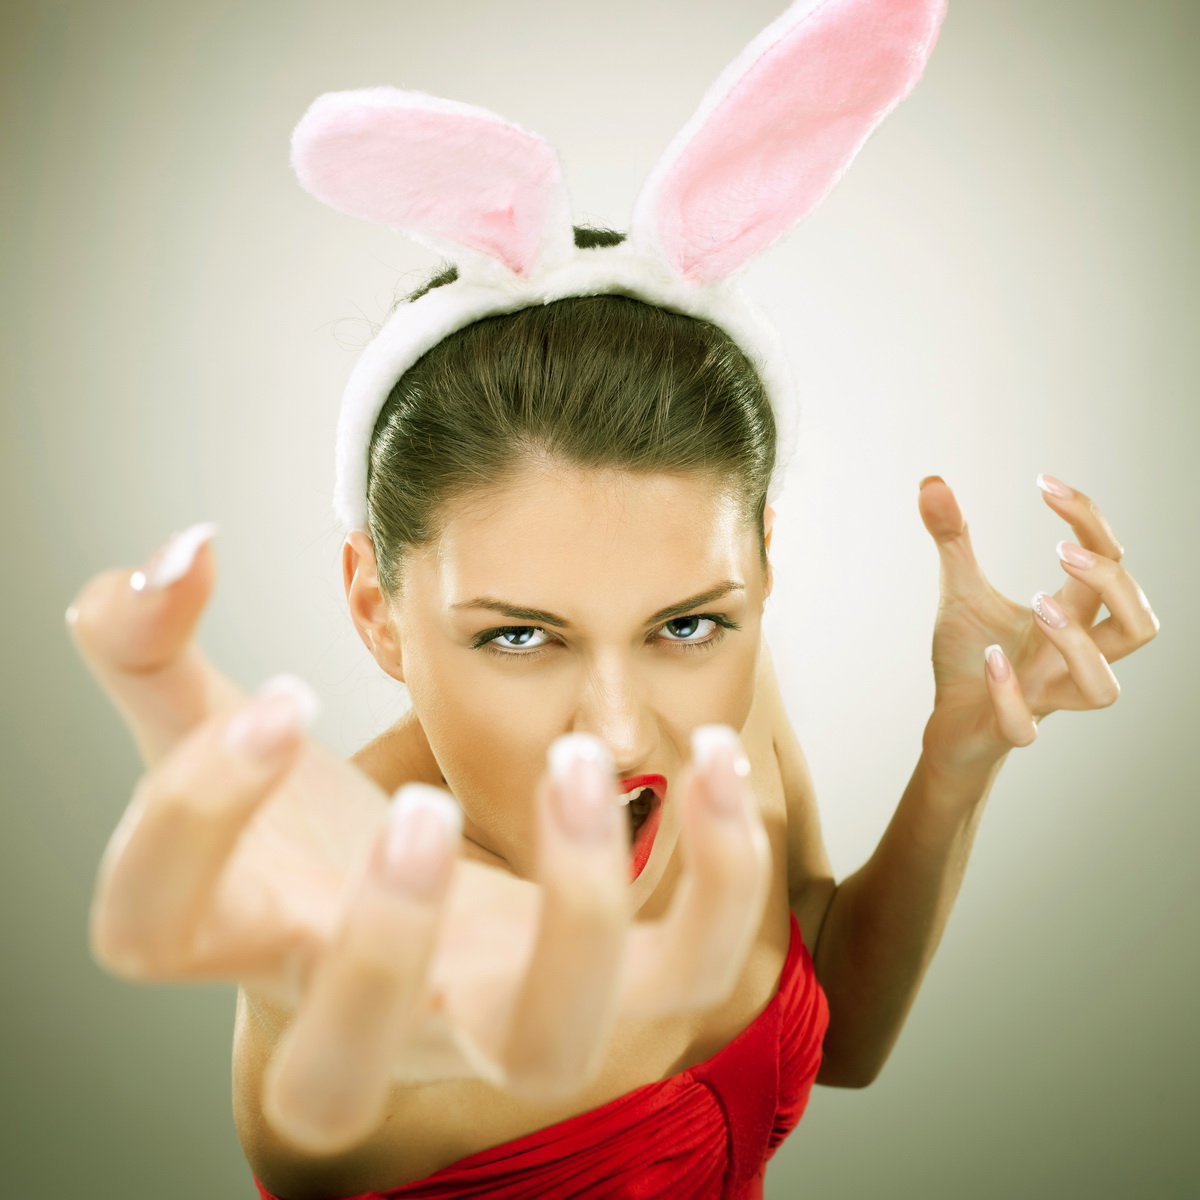 evil bunny woman screaming and reaching to get you - vintage look picture